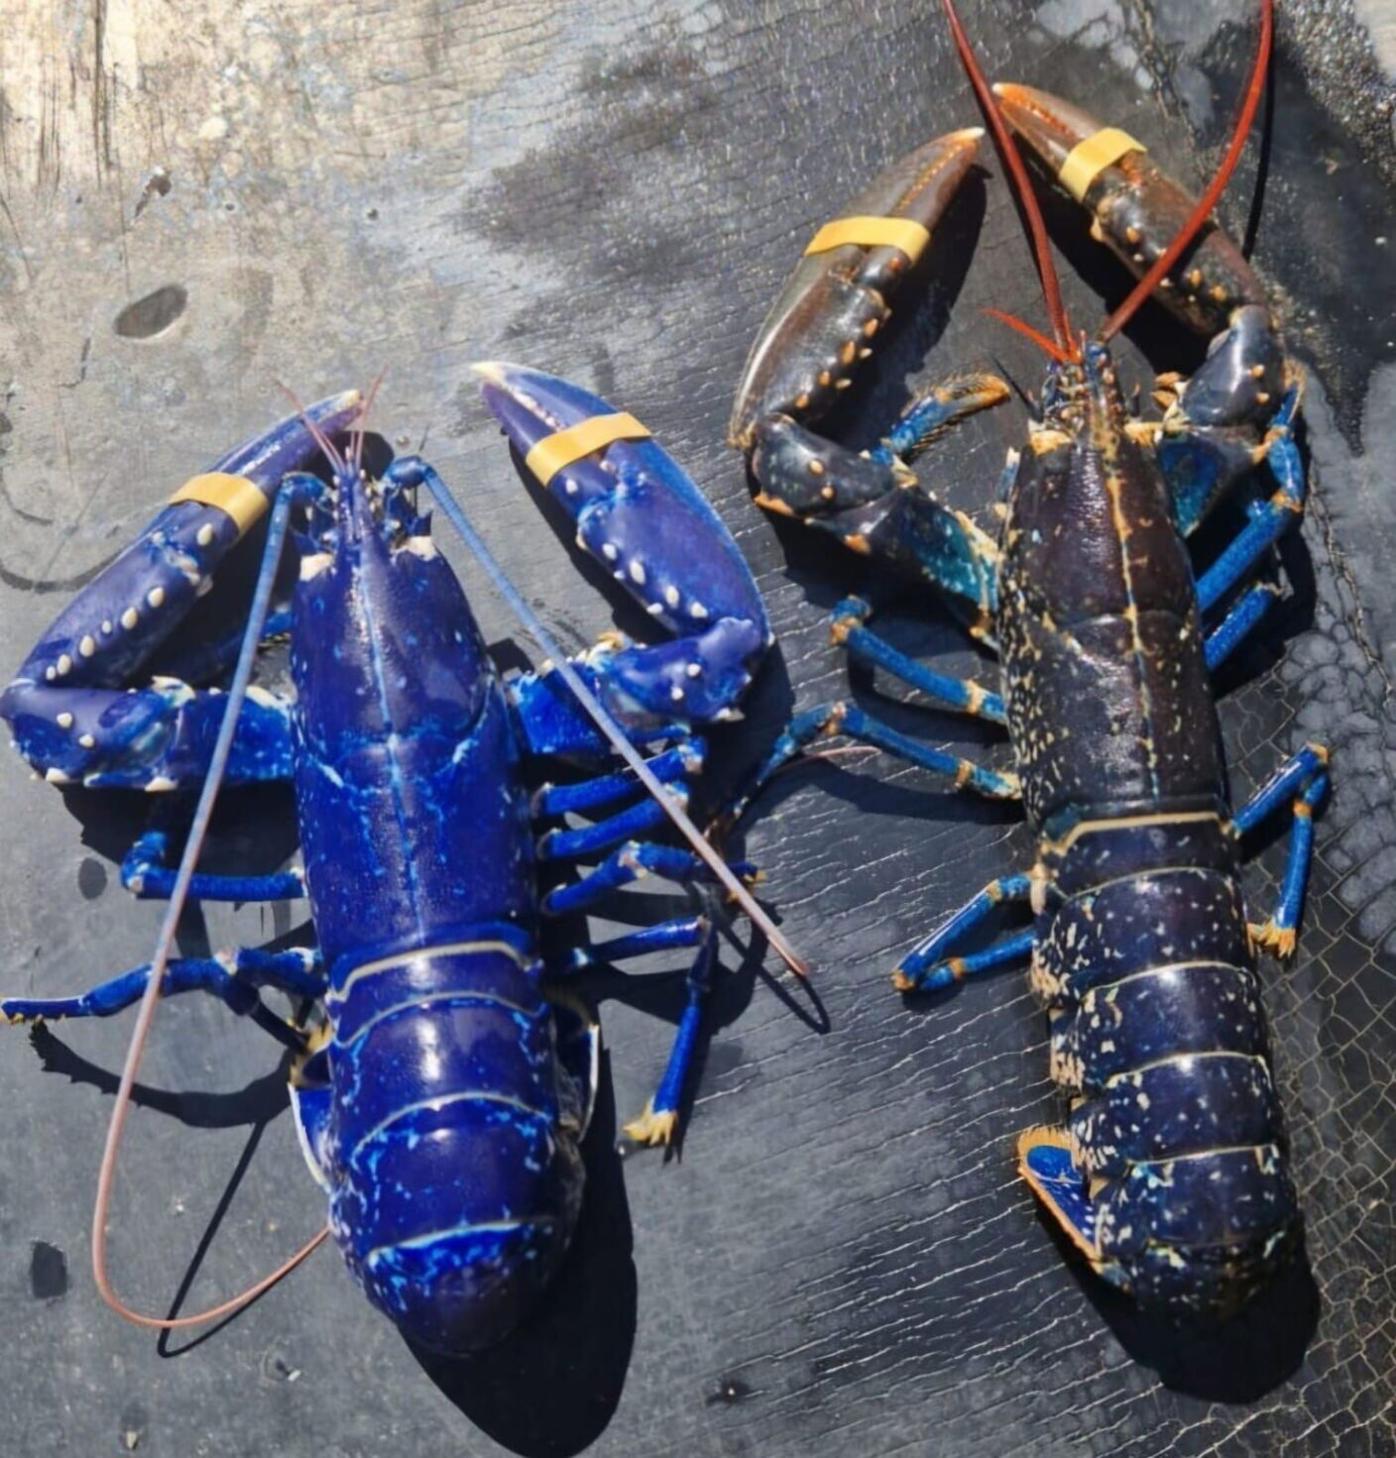 Fisherman catches ultra rare 'one in two million' blue lobster | National |  gjsentinel.com